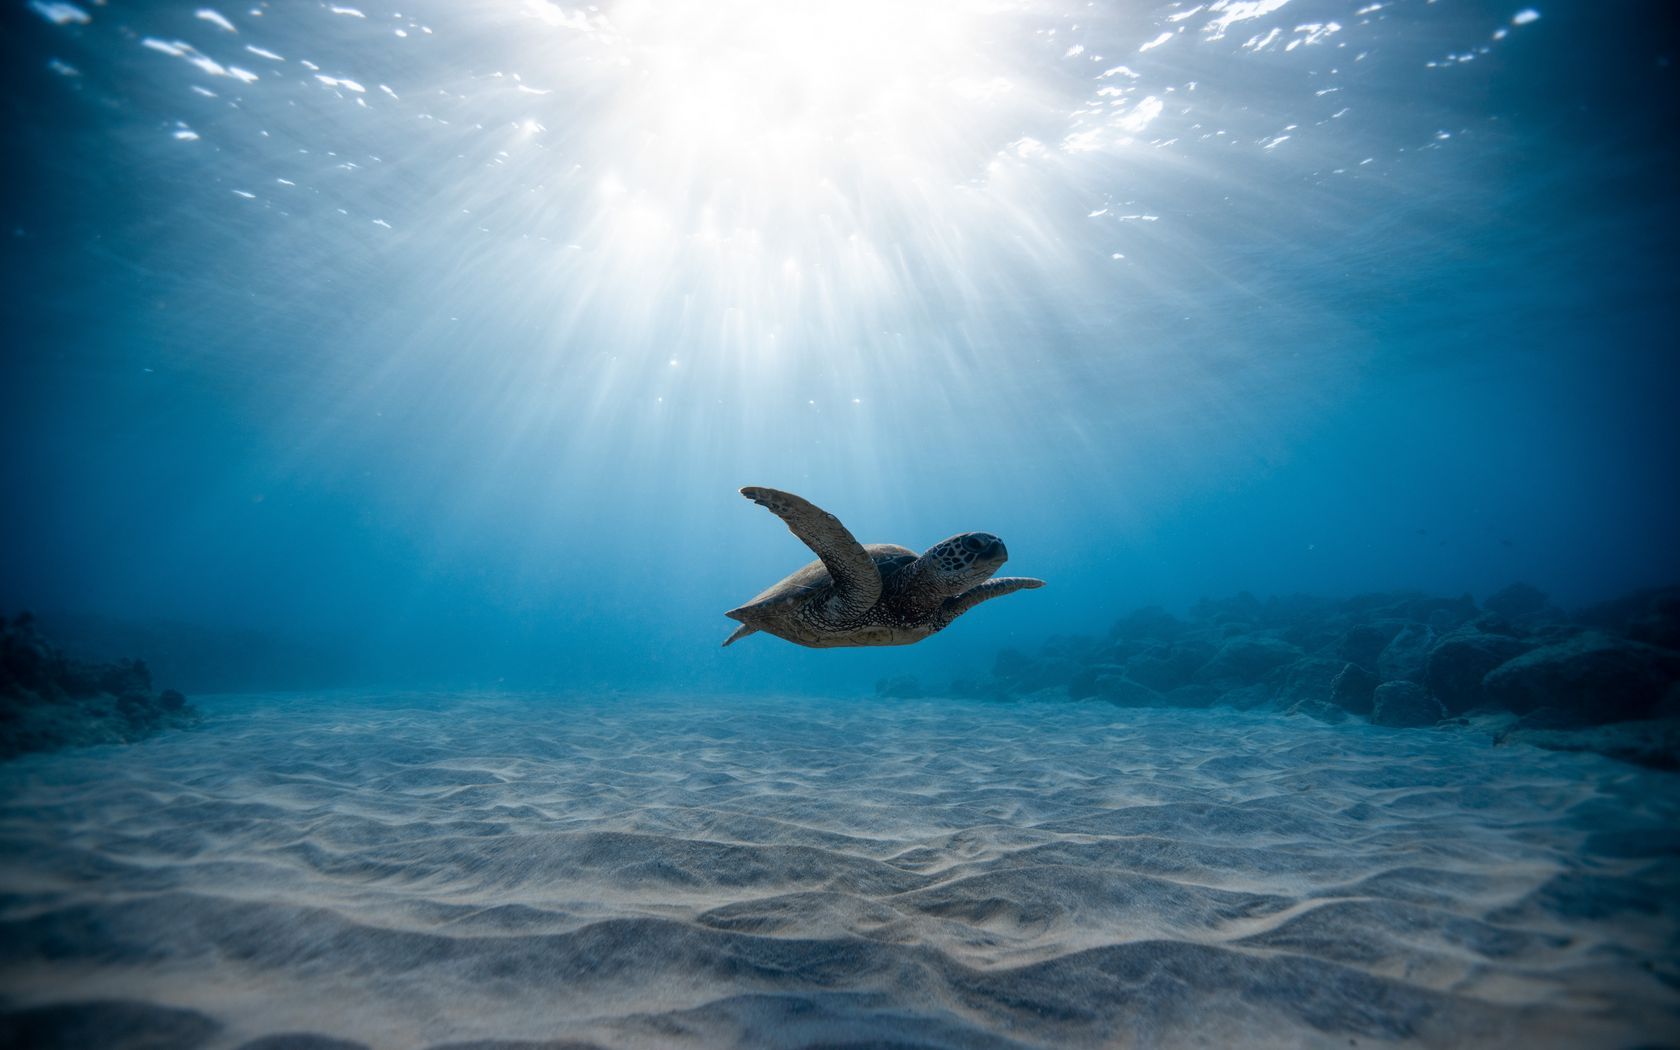 A turtle swimming in the ocean under water - Sea turtle